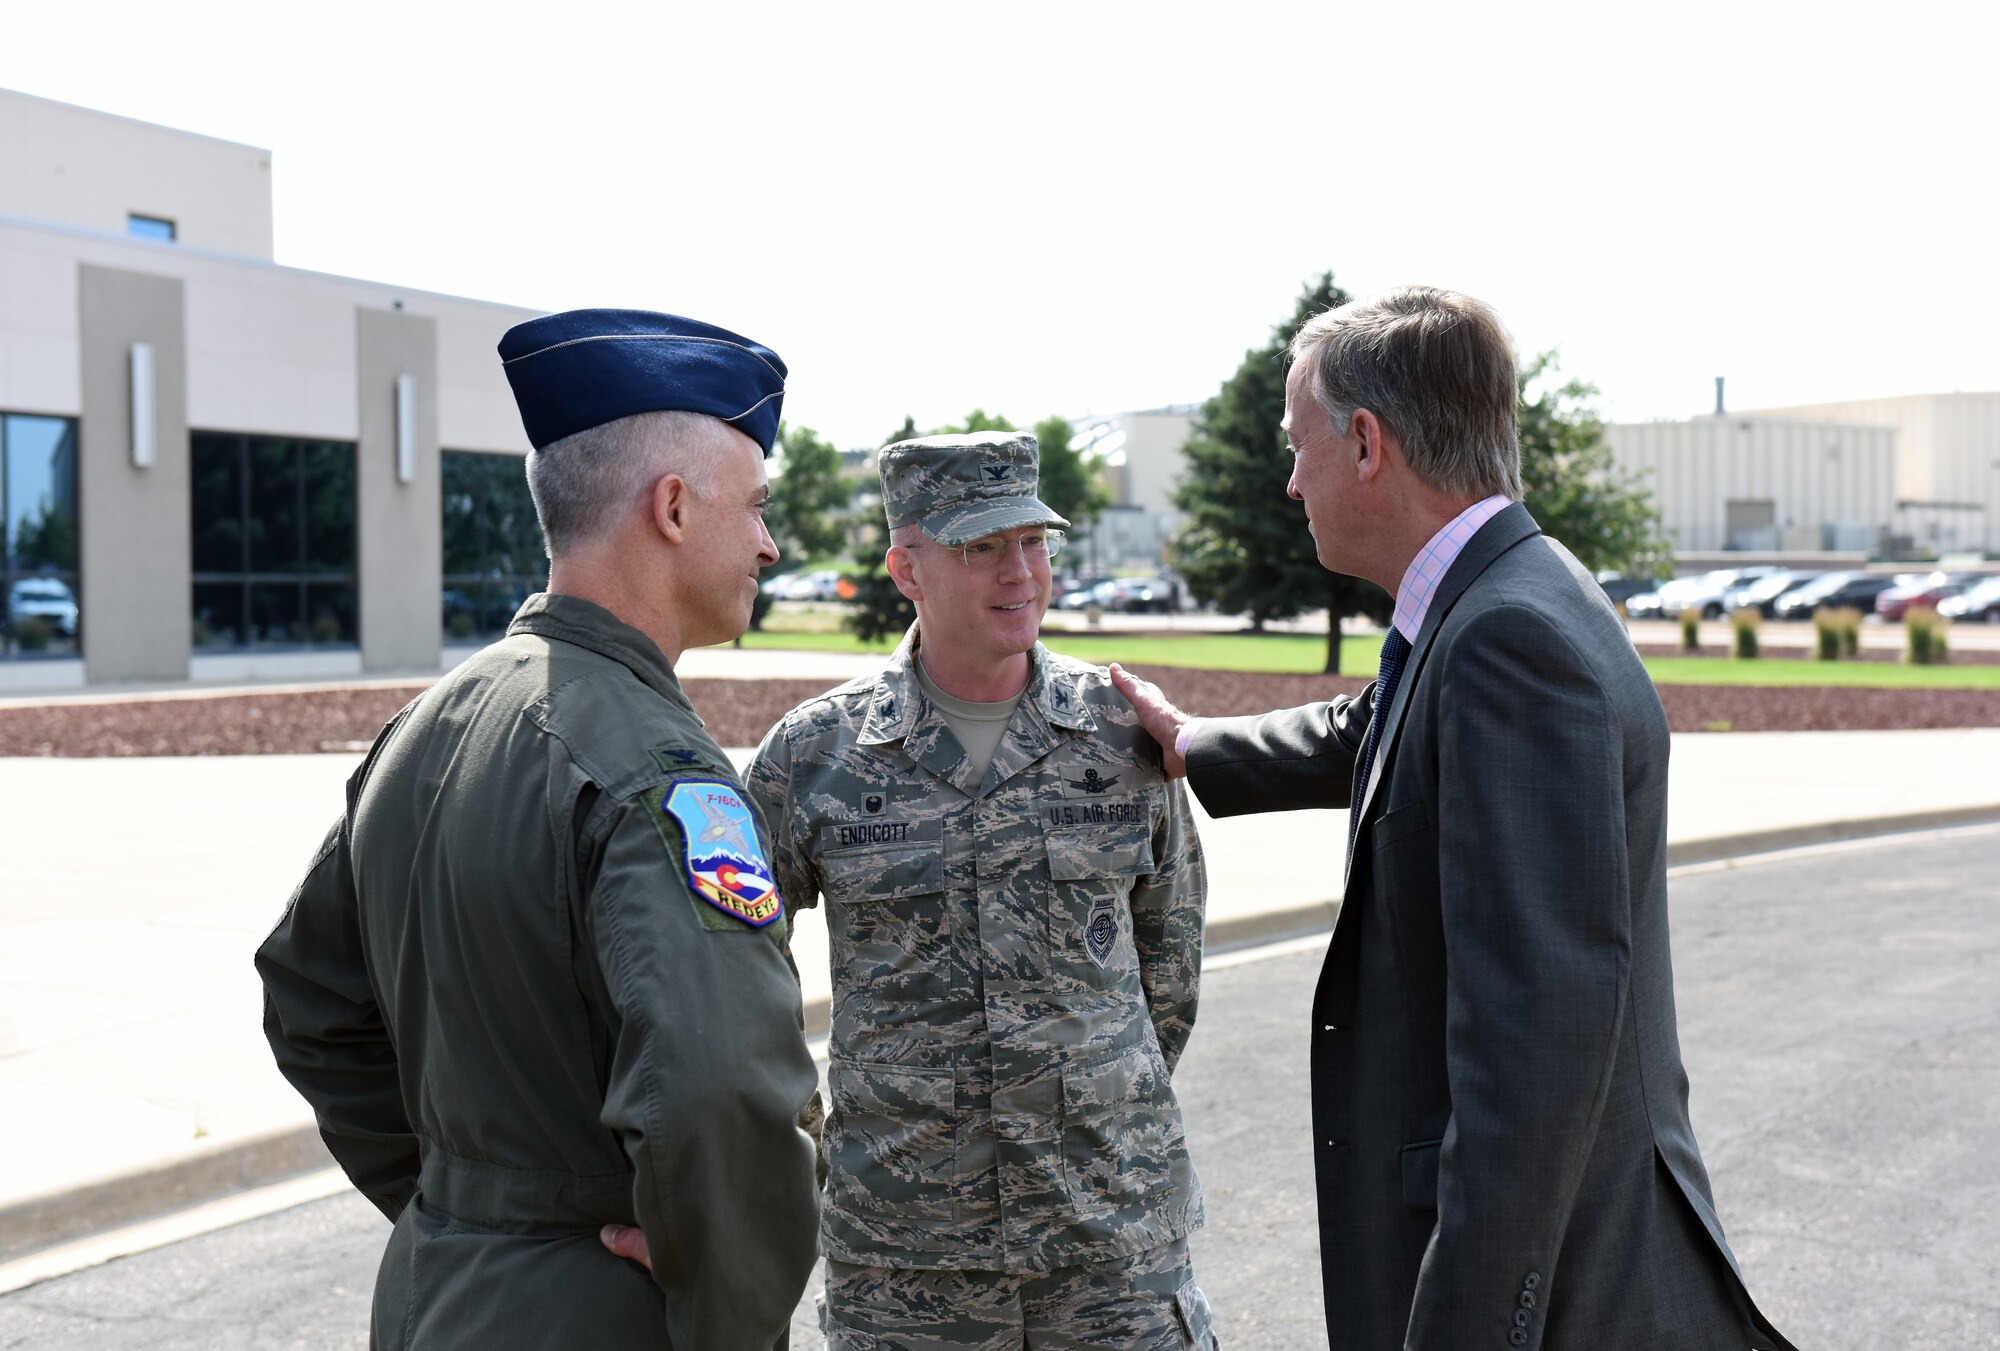 Gov. John Hickenlooper of Colorado, bids farewell to Col. Troy Endicott, center, 460th Space Wing commander, and Col. Brian Turner, far left, 140th Wing commander, following a visit at Buckley Air Force Base, Colorado, July 17, 2018.